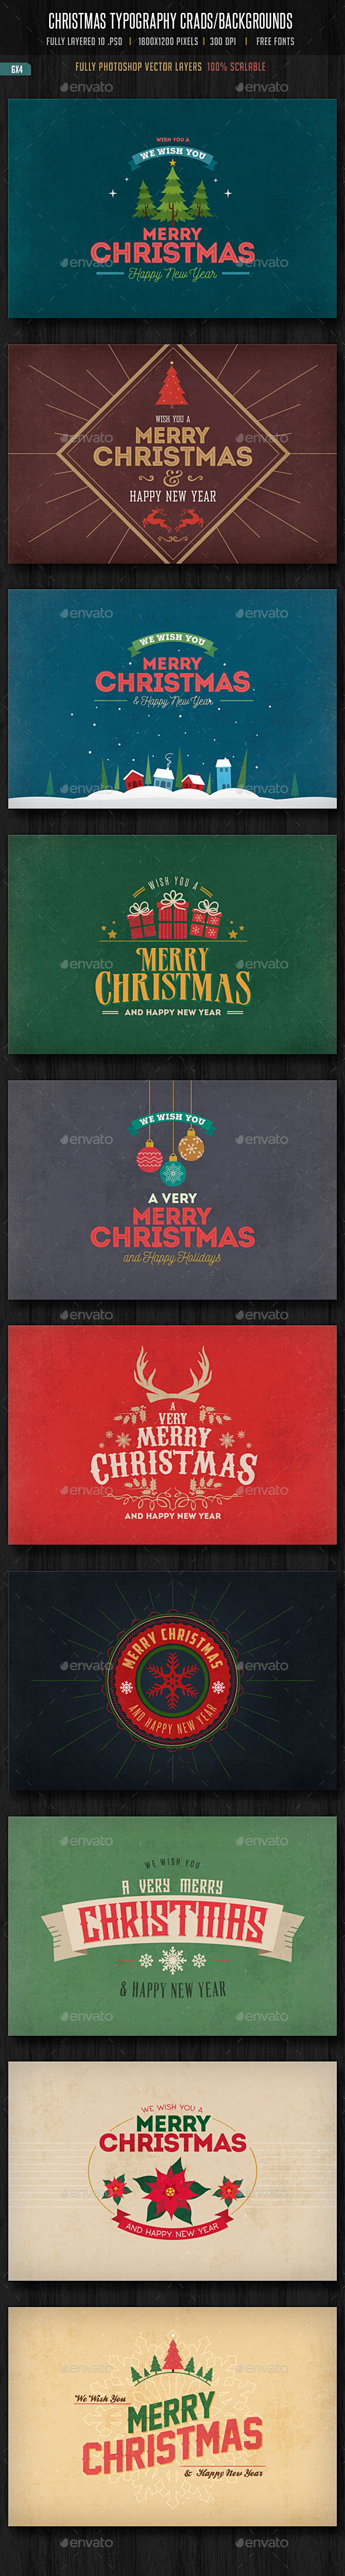 Typography Christmas Cards/ Backgrounds